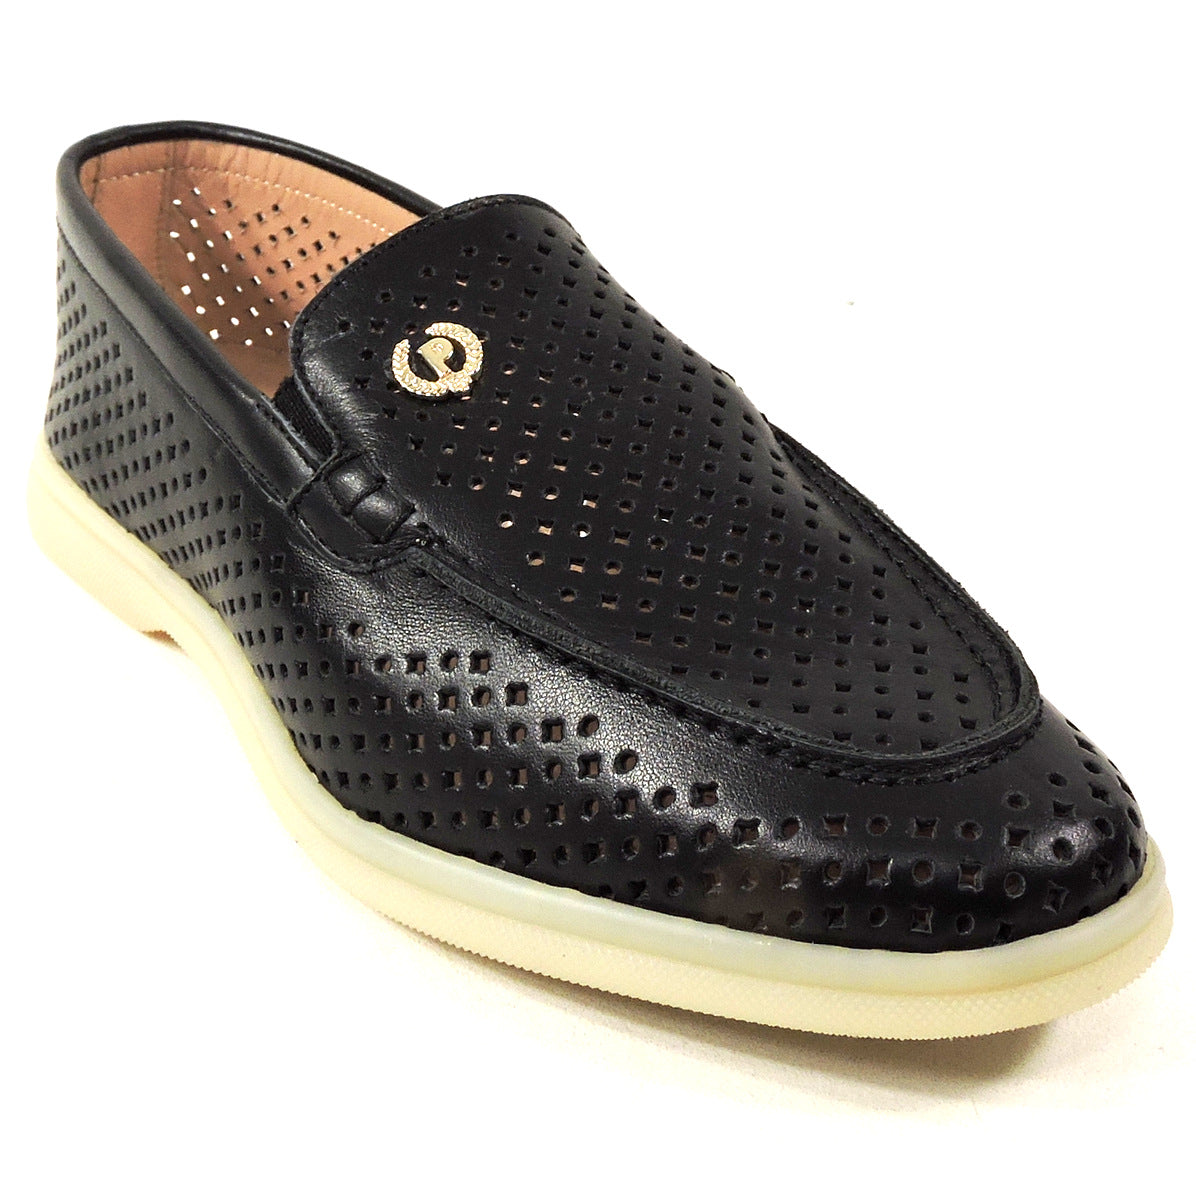 POLLINI 🇮🇹 WOMEN'S BLACK LEATHER COMFORT SUMMER LOAFERS